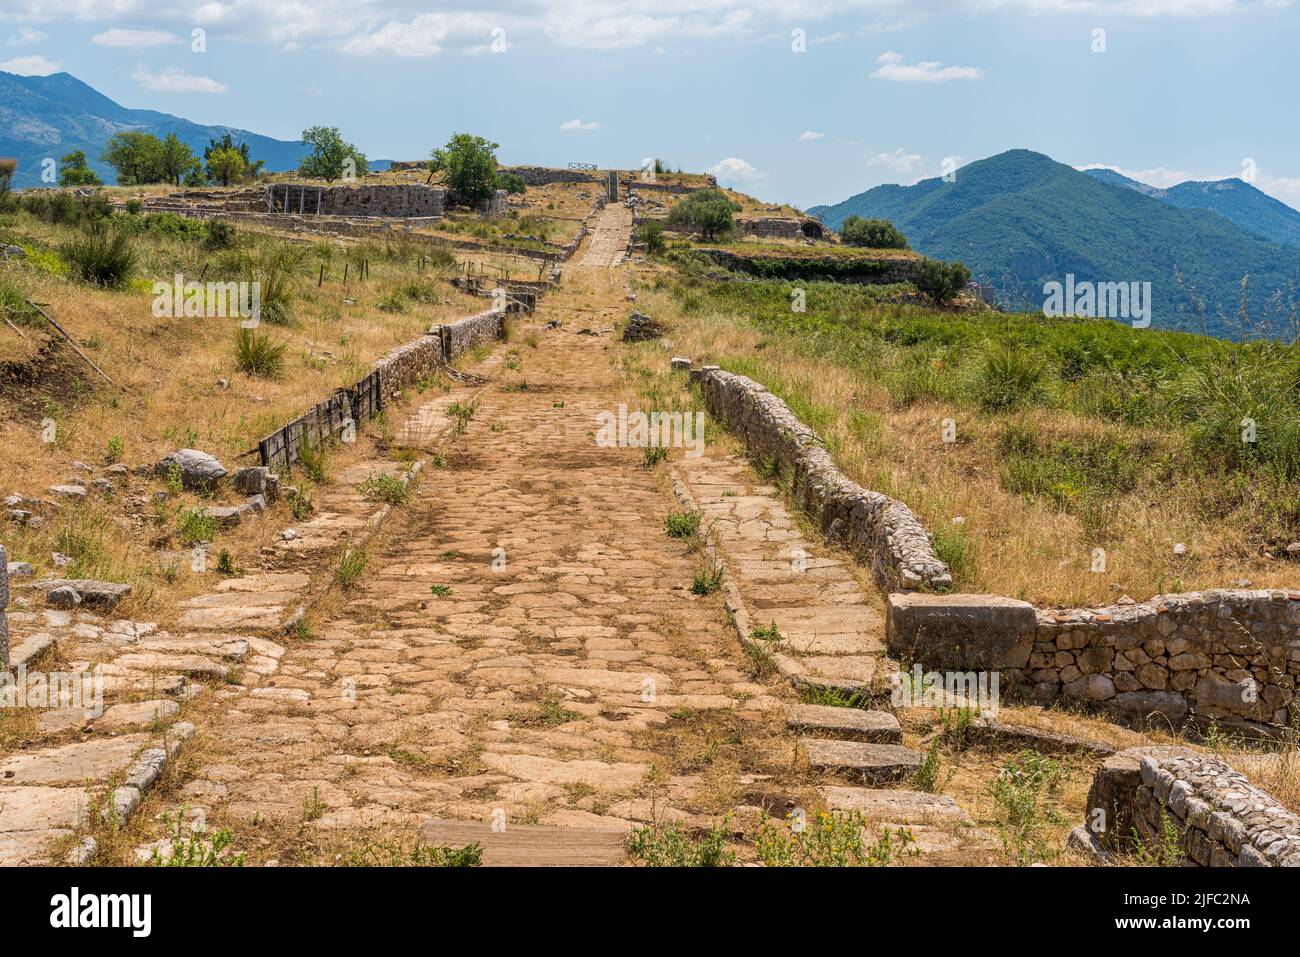 Norba, ancient town of Latium on the western edge of the Monti Lepini, Latina Province, Lazio, Italy Stock Photo